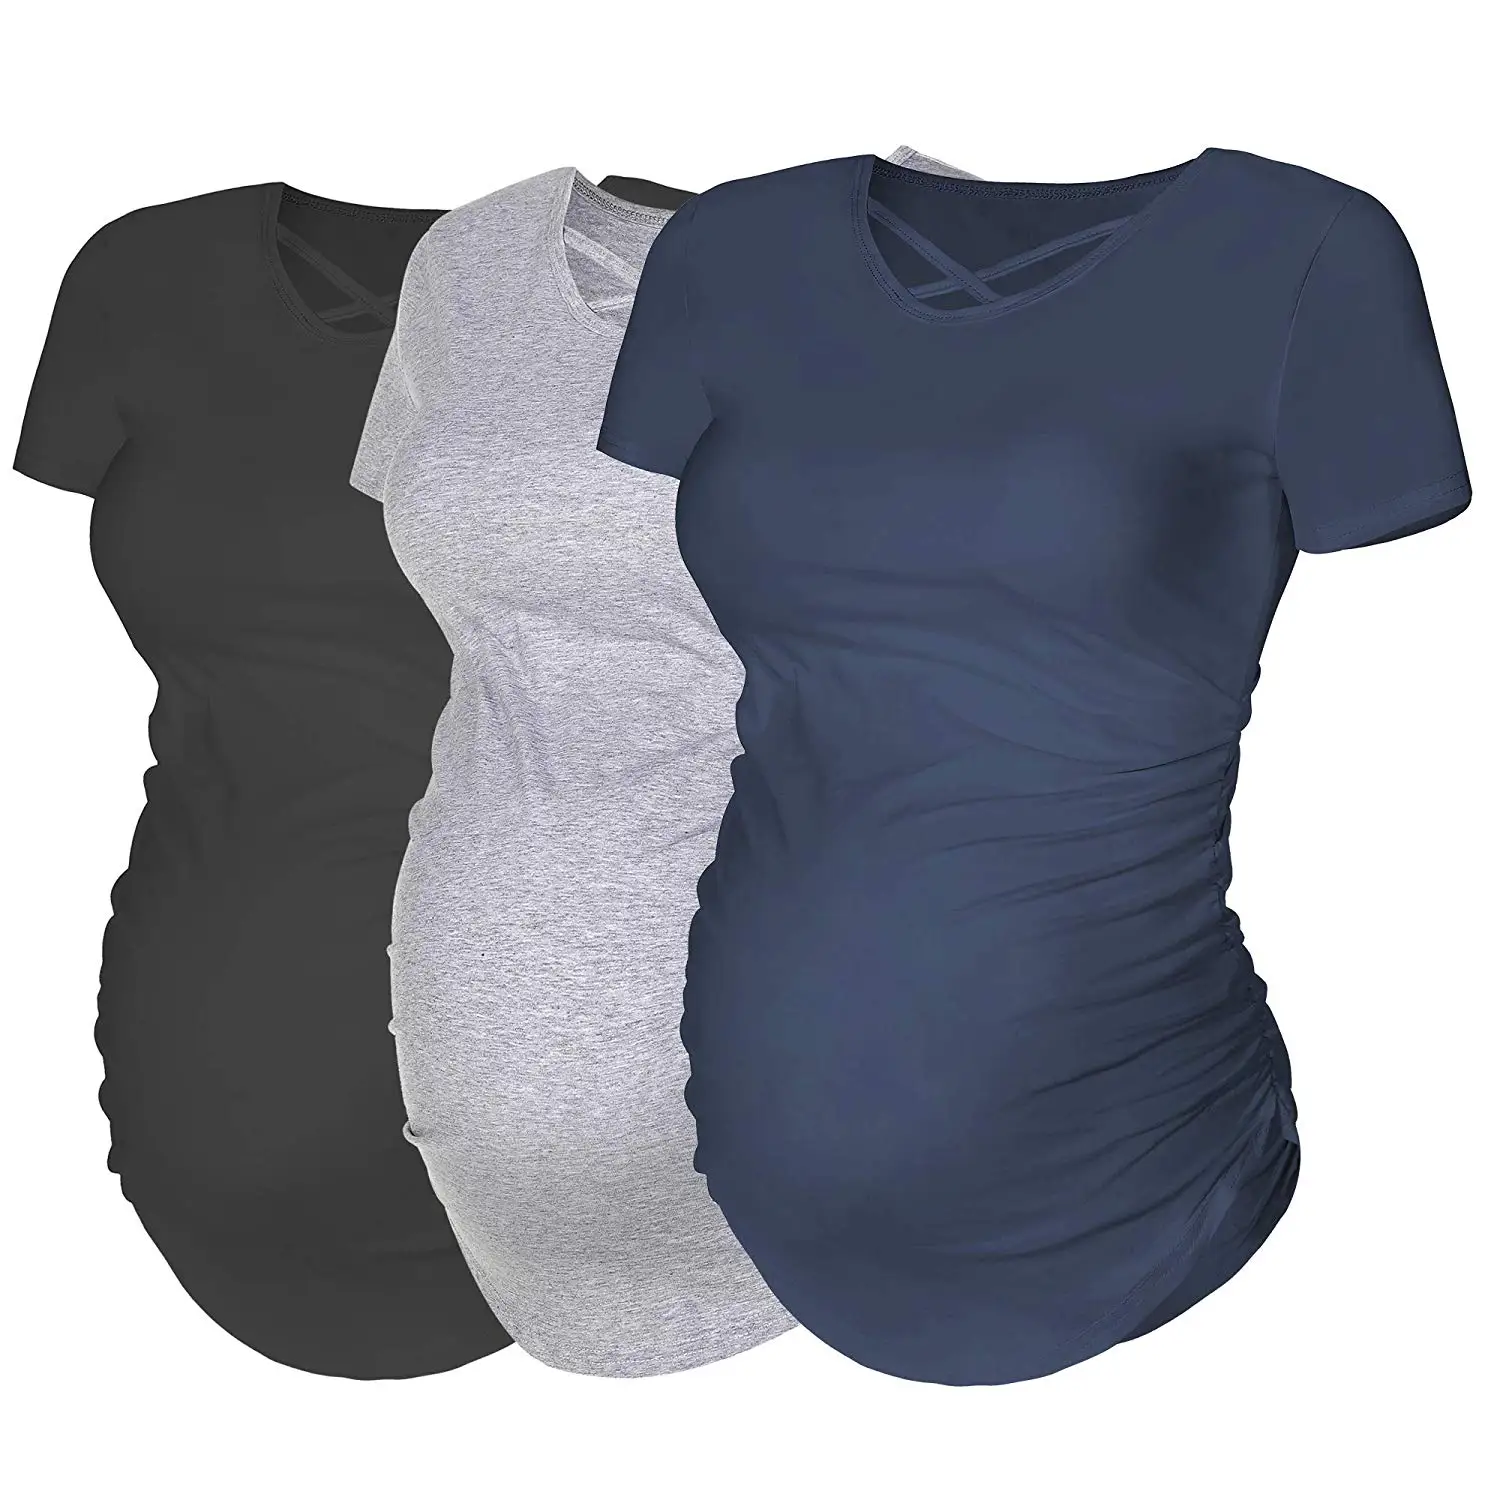 

BM20172 Womens Short Sleeve Maternity Tops Pregnancy T-Shirt Criss Cross Cacual Ruched Side Mama Clothes 3 Pack